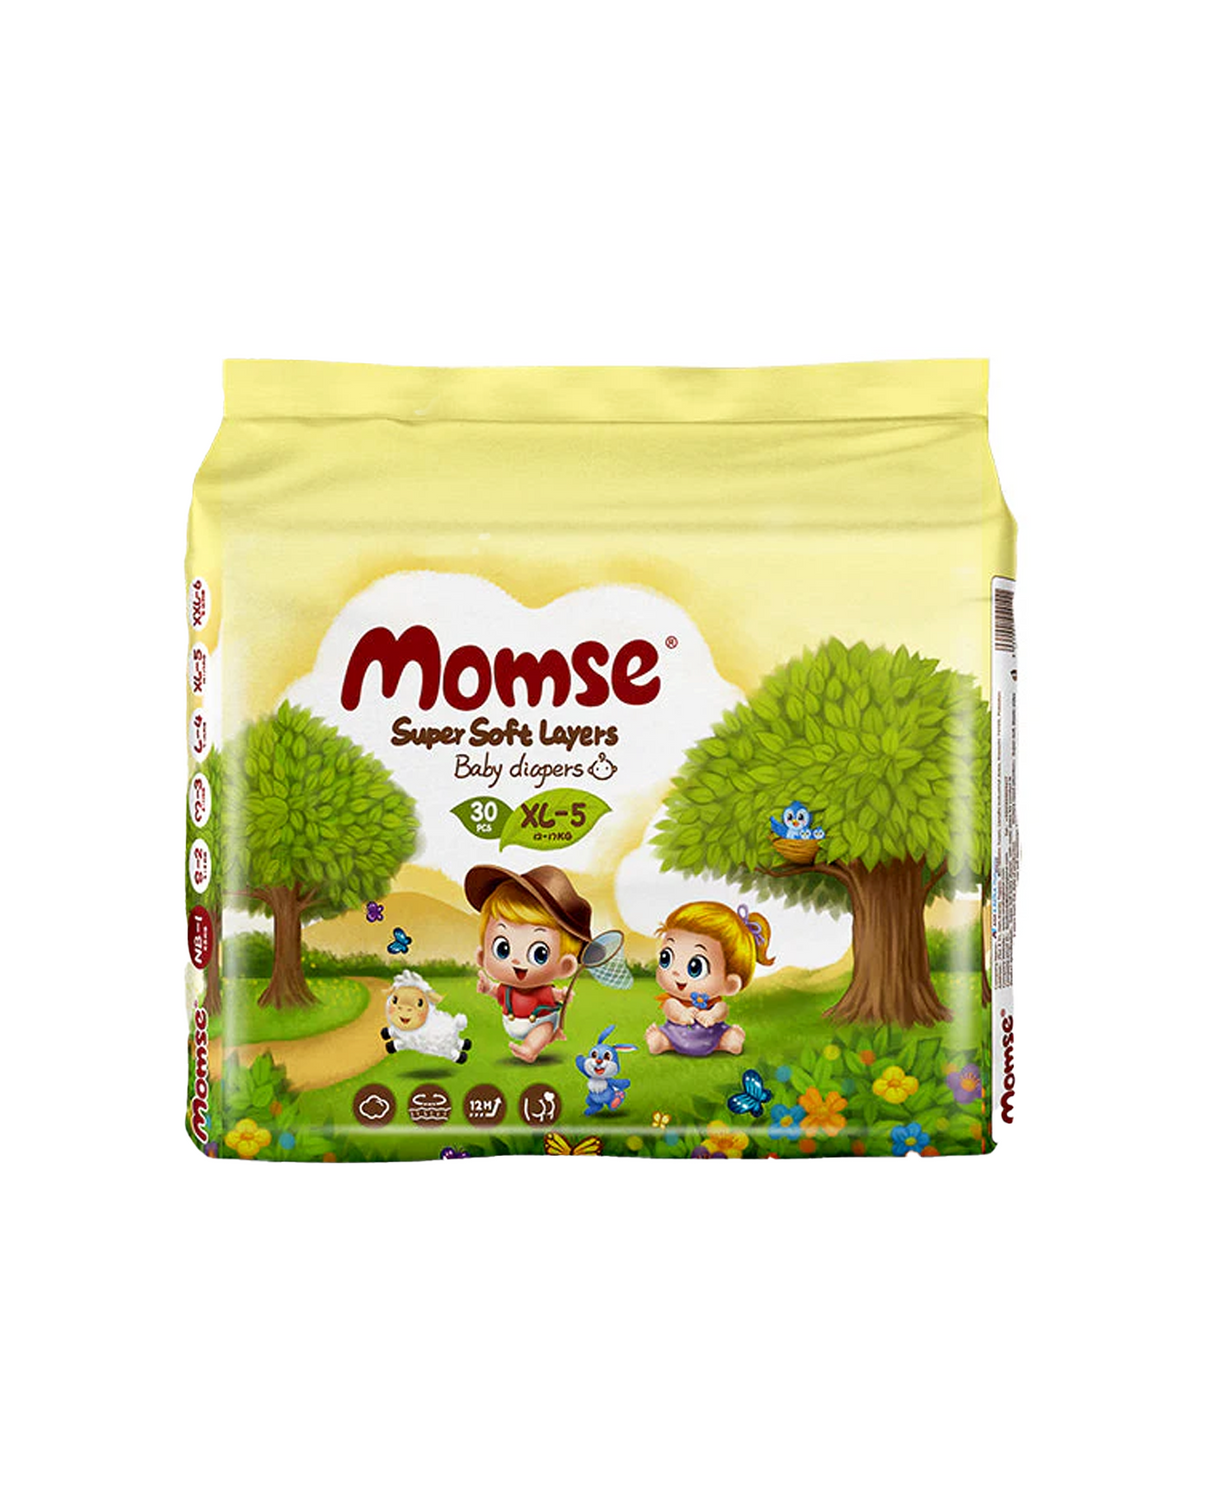 momse diapers economy pack xl-5 30pc